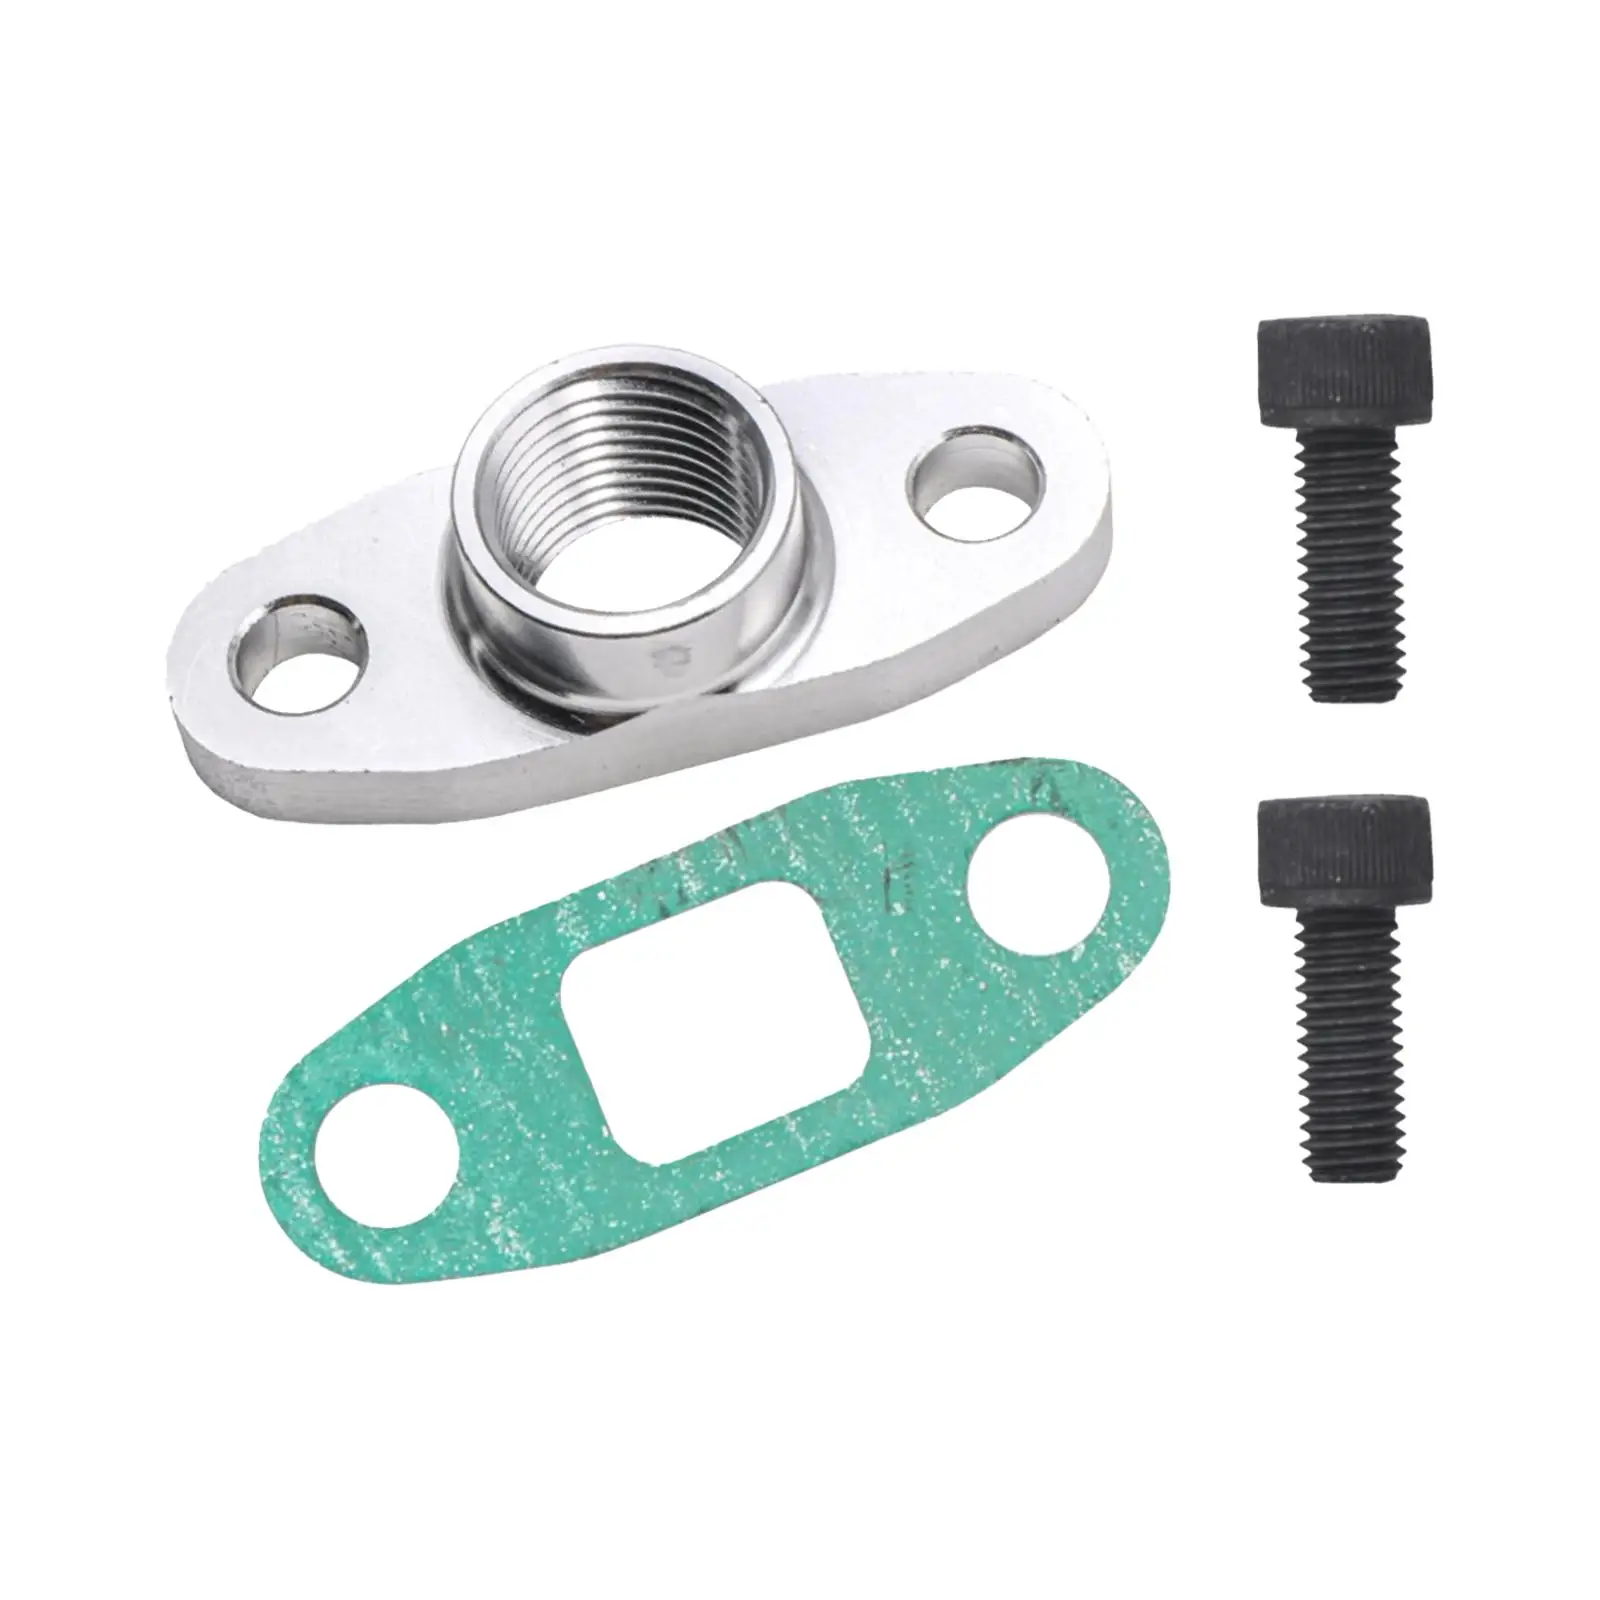 Oil Drain Return Flange Adapter Set Durable with Bolts Accessory with Gasket